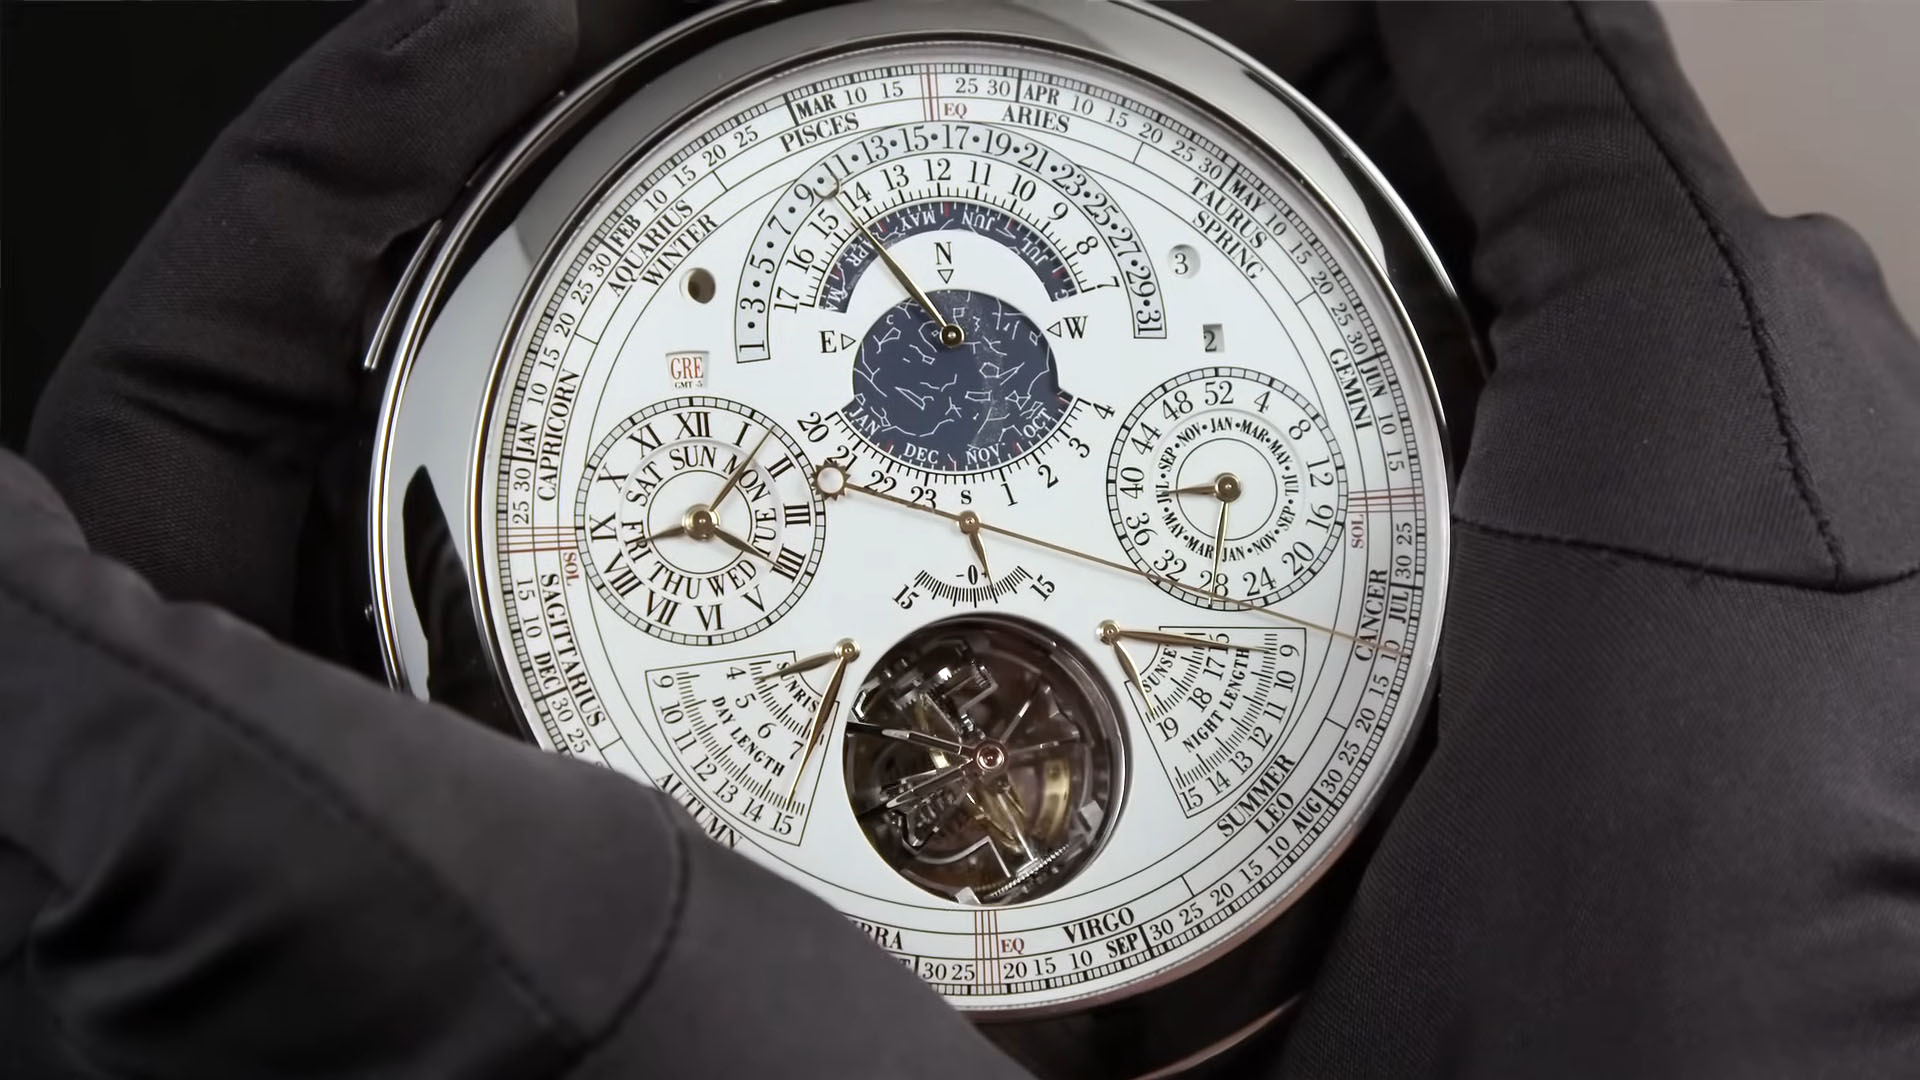 Vacheron Constantin 57260 - most expensive and most complicated watch